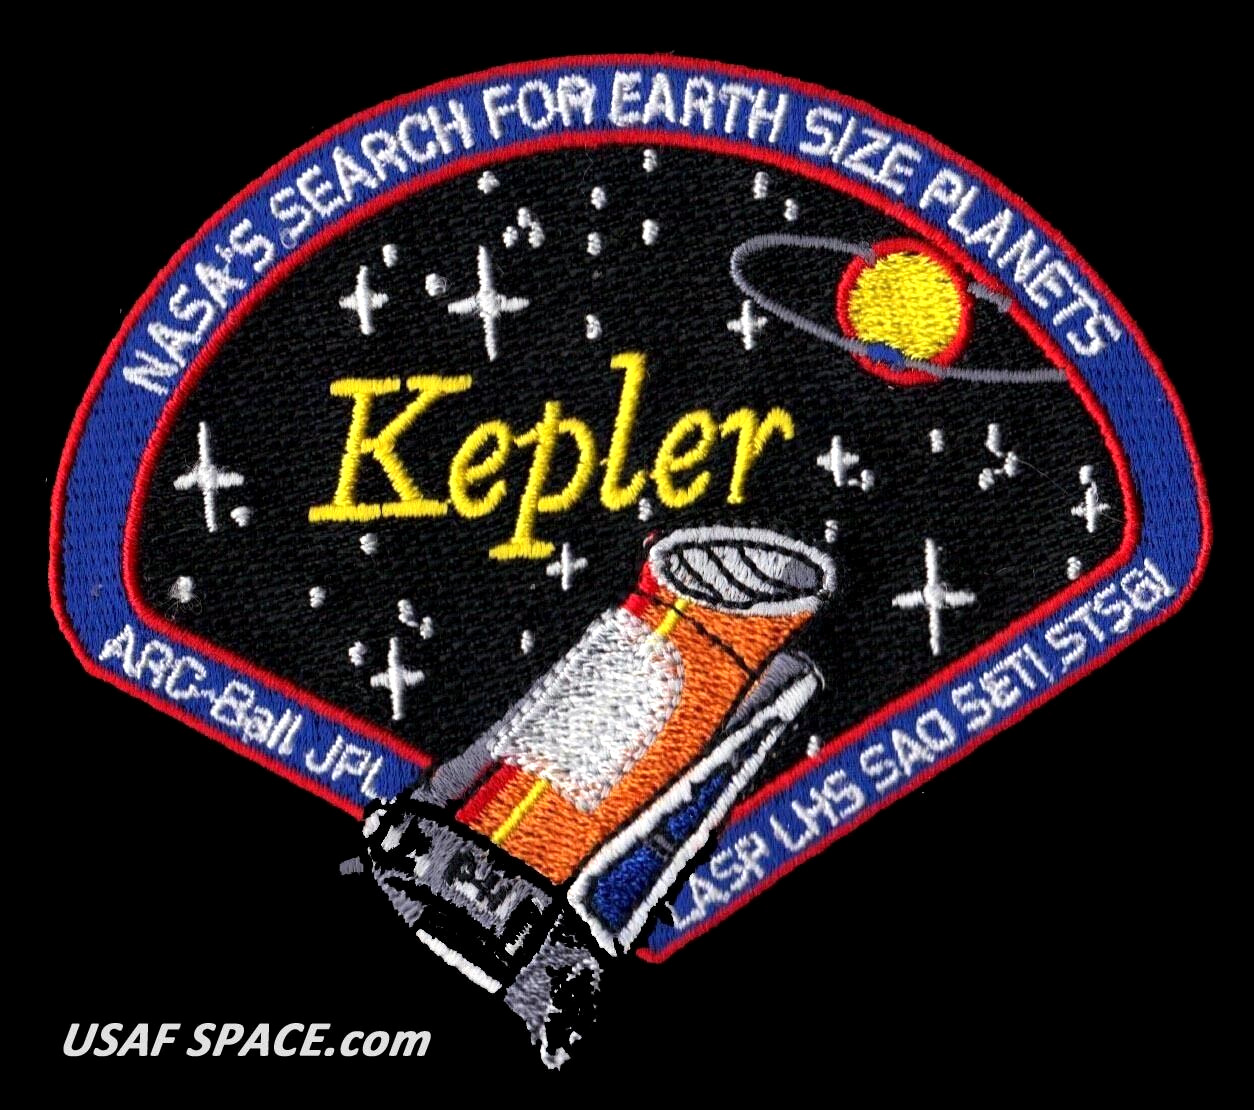 KEPLER SPACE TELESCOPE - NASA'S SEARCH FOR EARTH SIZE PLANETS - JPL NASA PATCH